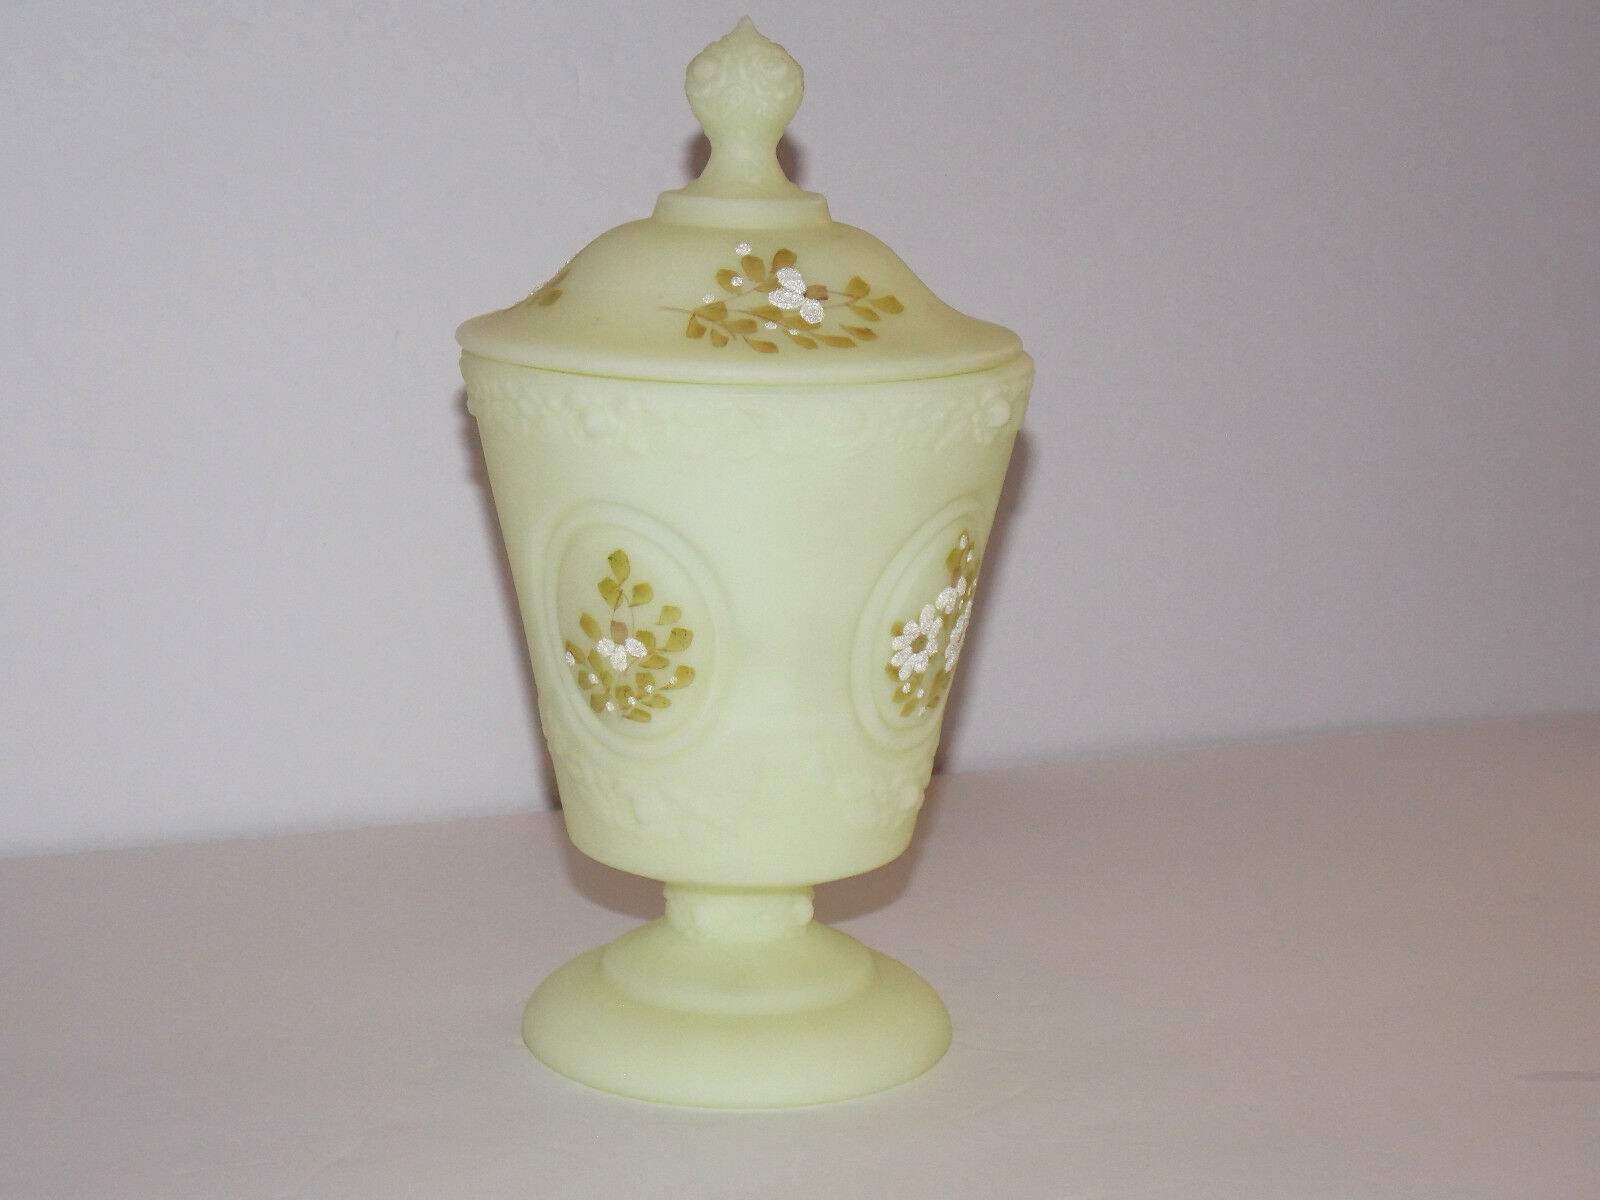 Fenton Hand Painted Pedestal Covered Jar - Custard In Color - Signed